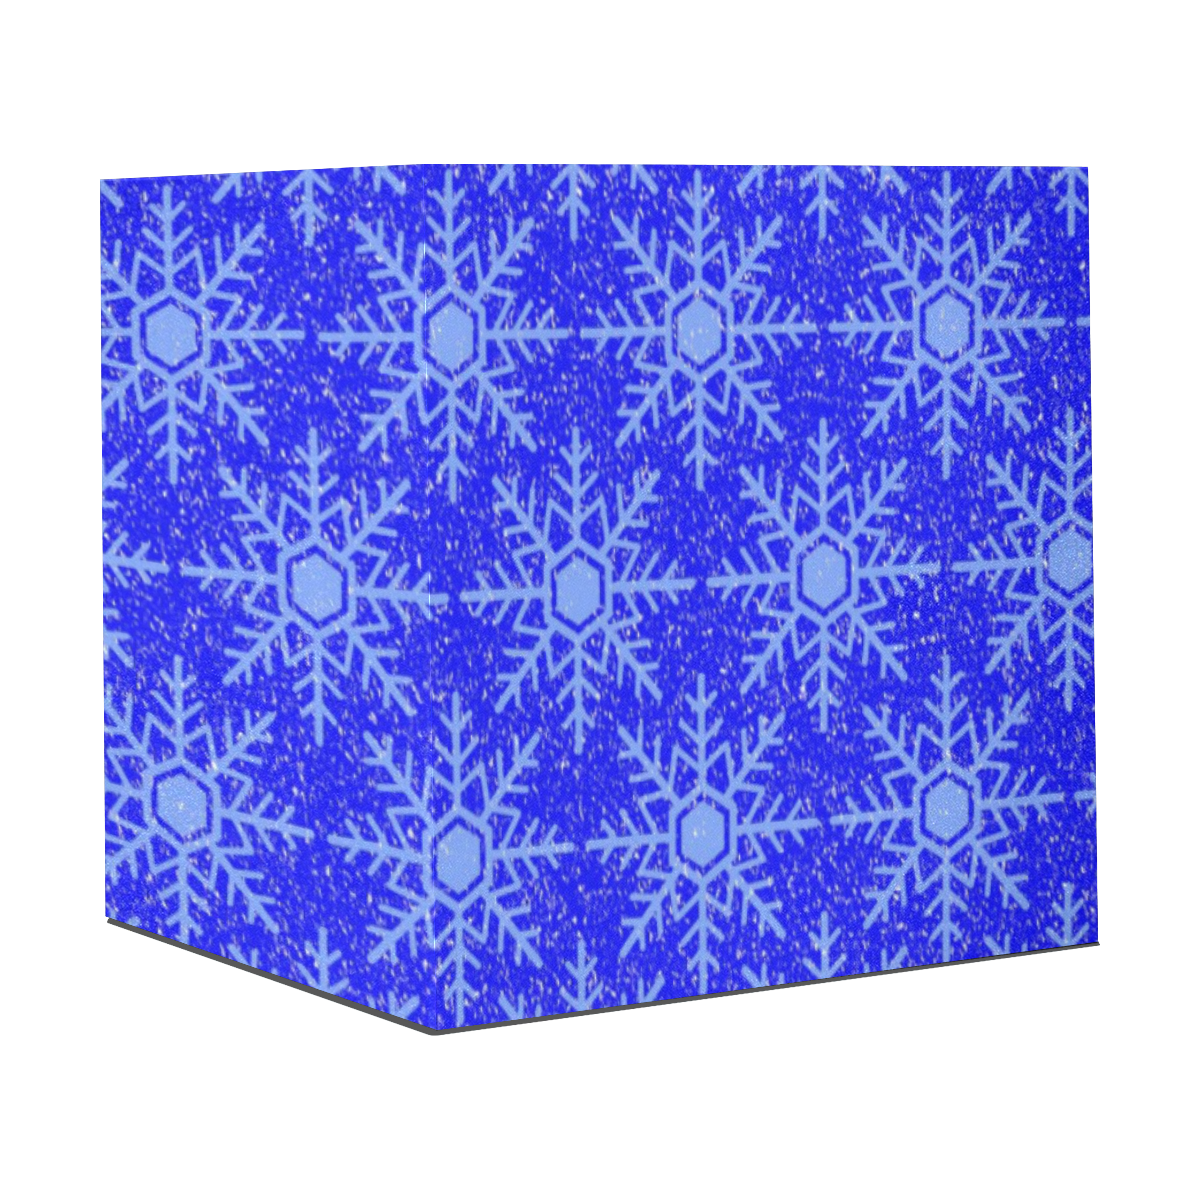 Blue Snowflakes Gift Wrapping Paper 58"x 23" (1 Roll)